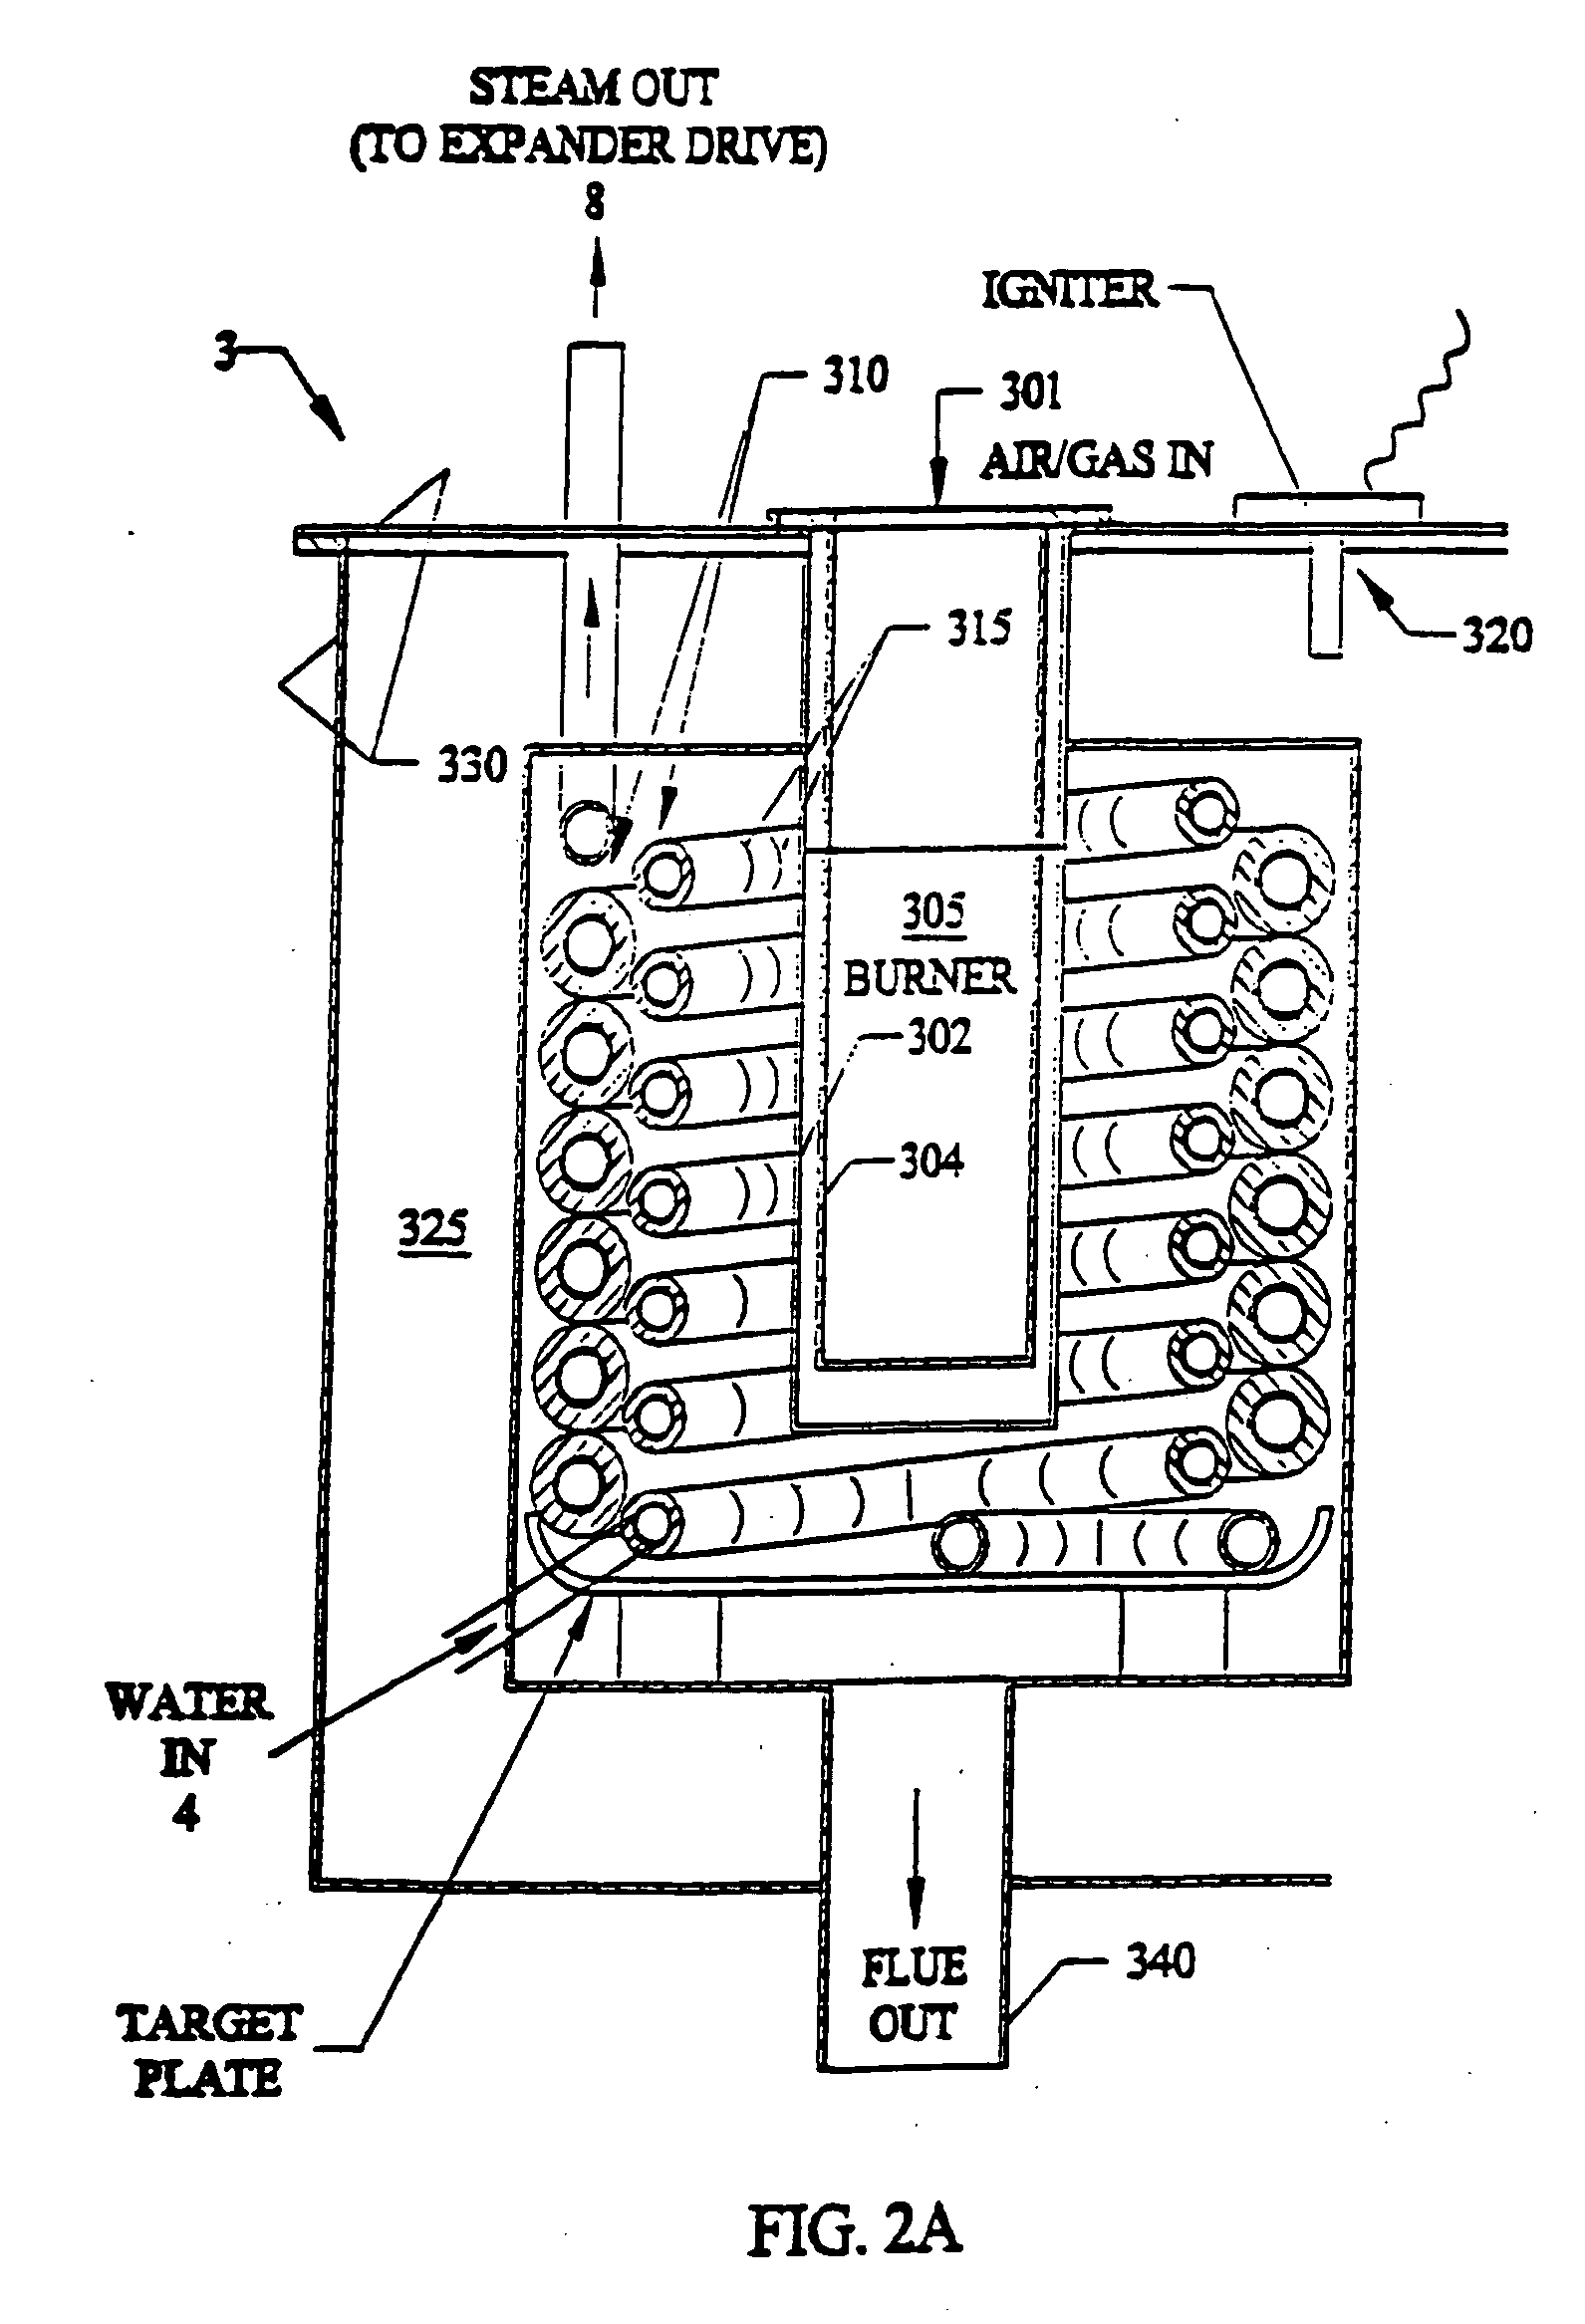 Power generation methods and systems